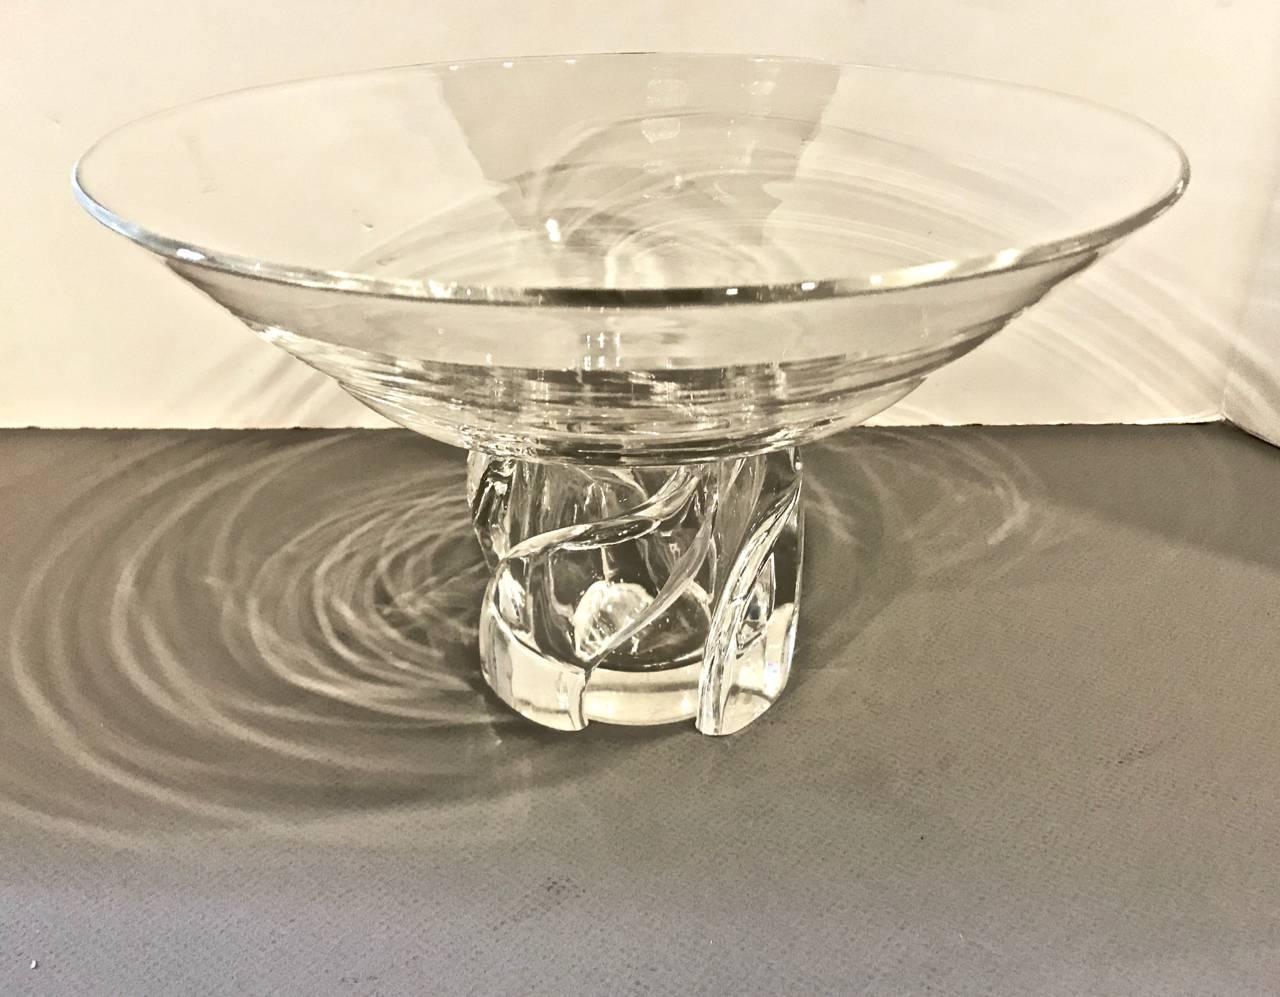 This is a stunning and unique Steuben pedestal bowl that dates to the second half of the 20th century. The bowl has the signature Steuben brilliance; the pedestal of the bowl swirls and is open to the bowl. The bottom diameter is 3.75 inches.